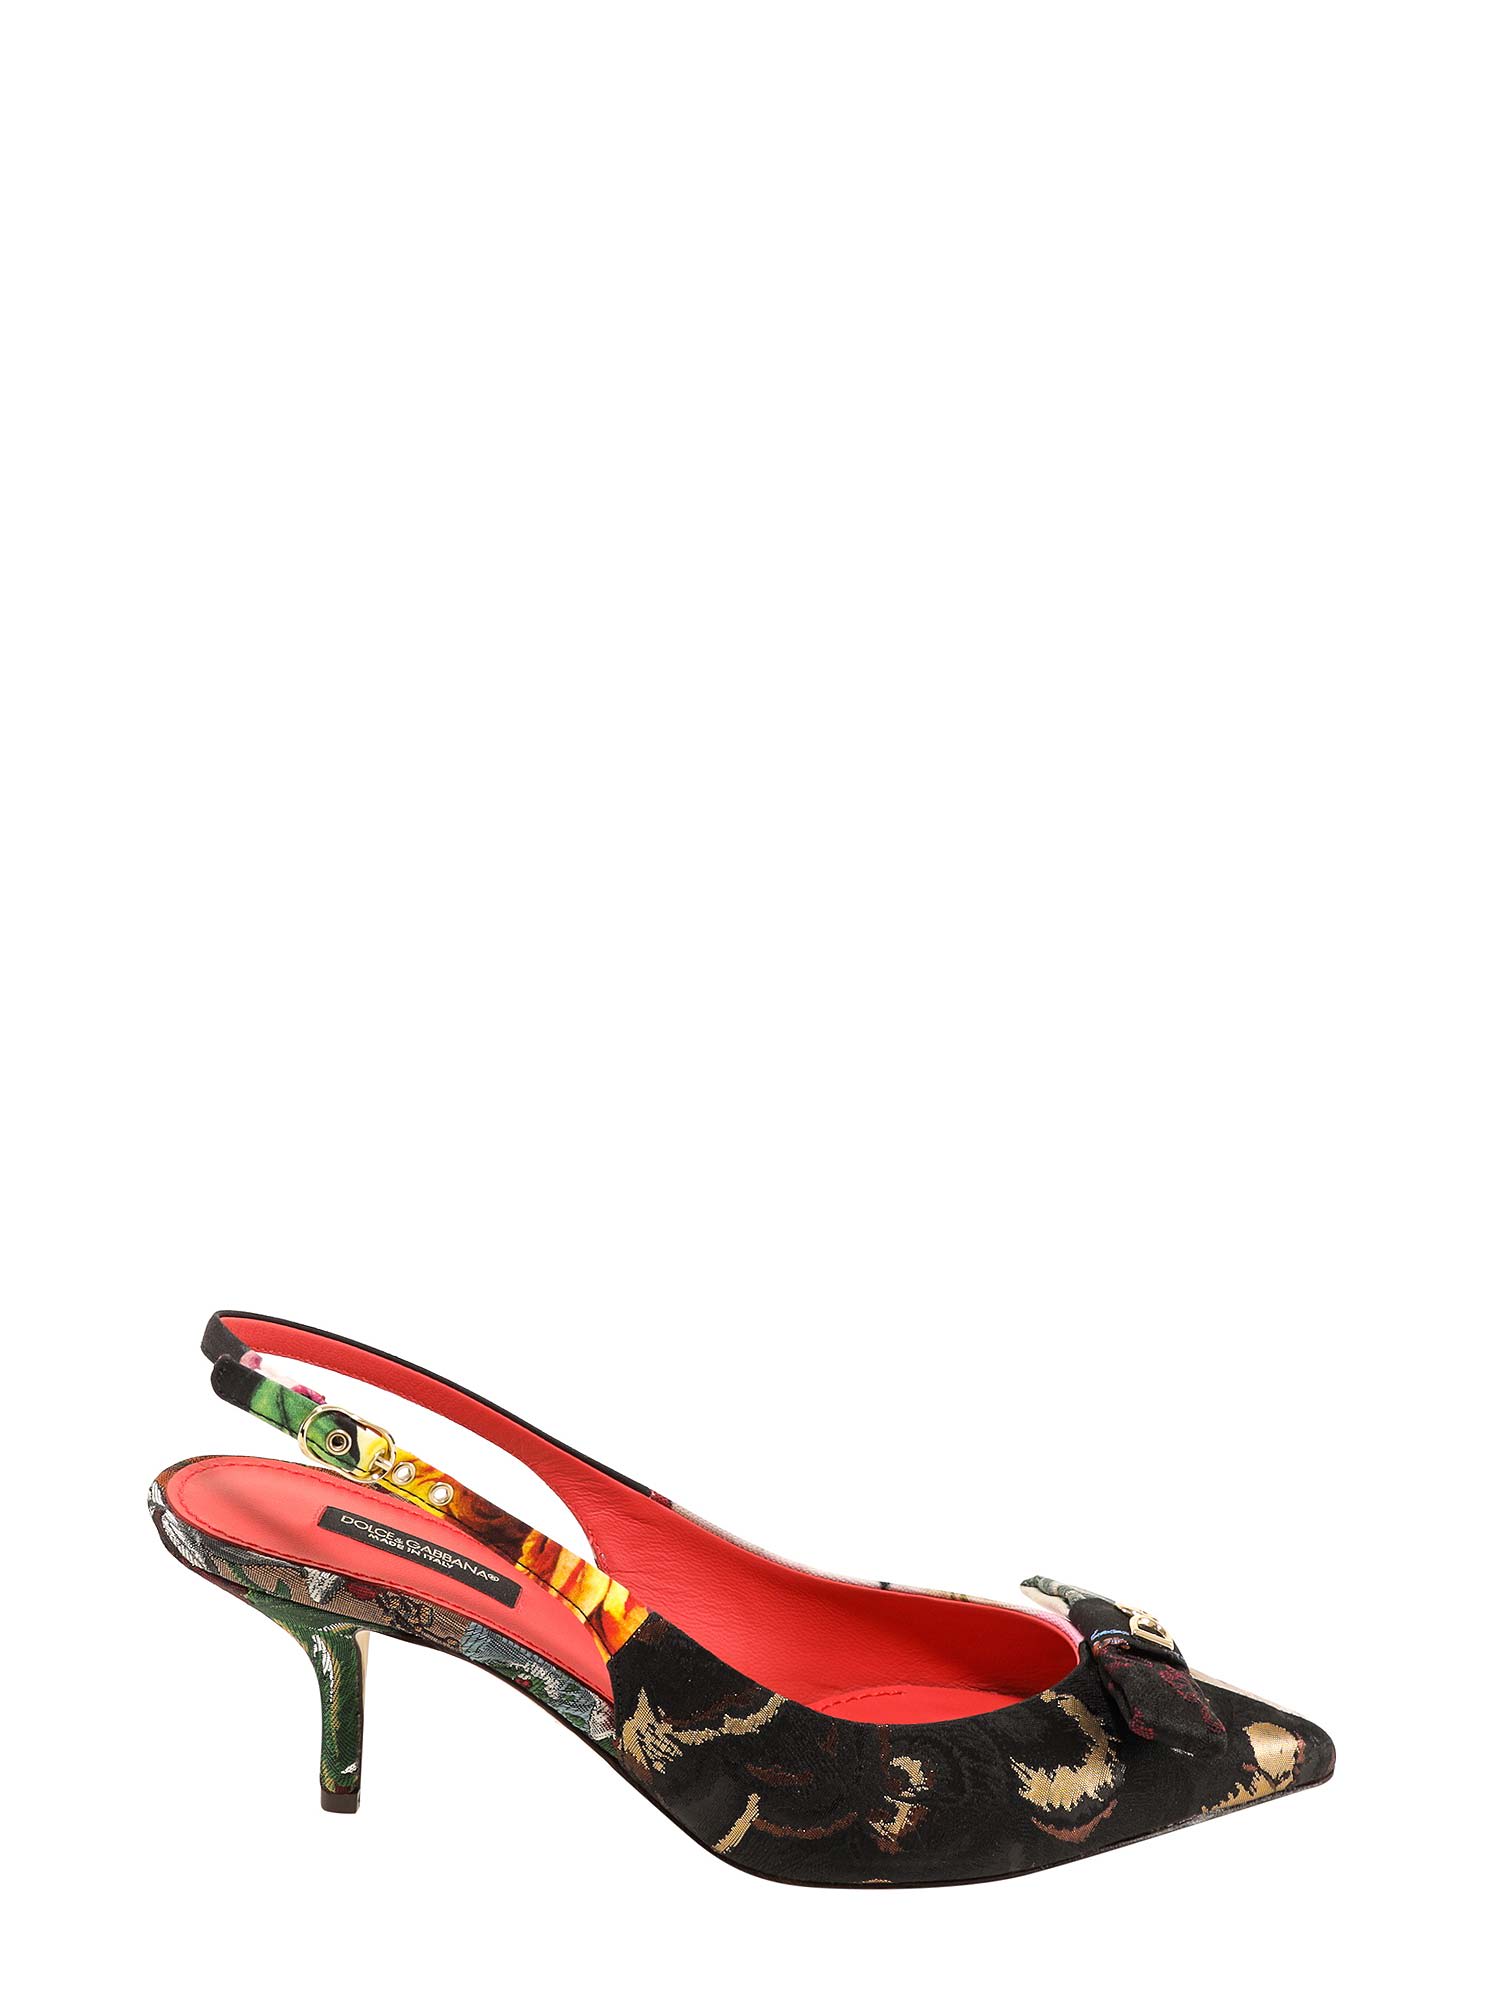 Buy Dolce & Gabbana Slingback online, shop Dolce & Gabbana shoes with free shipping